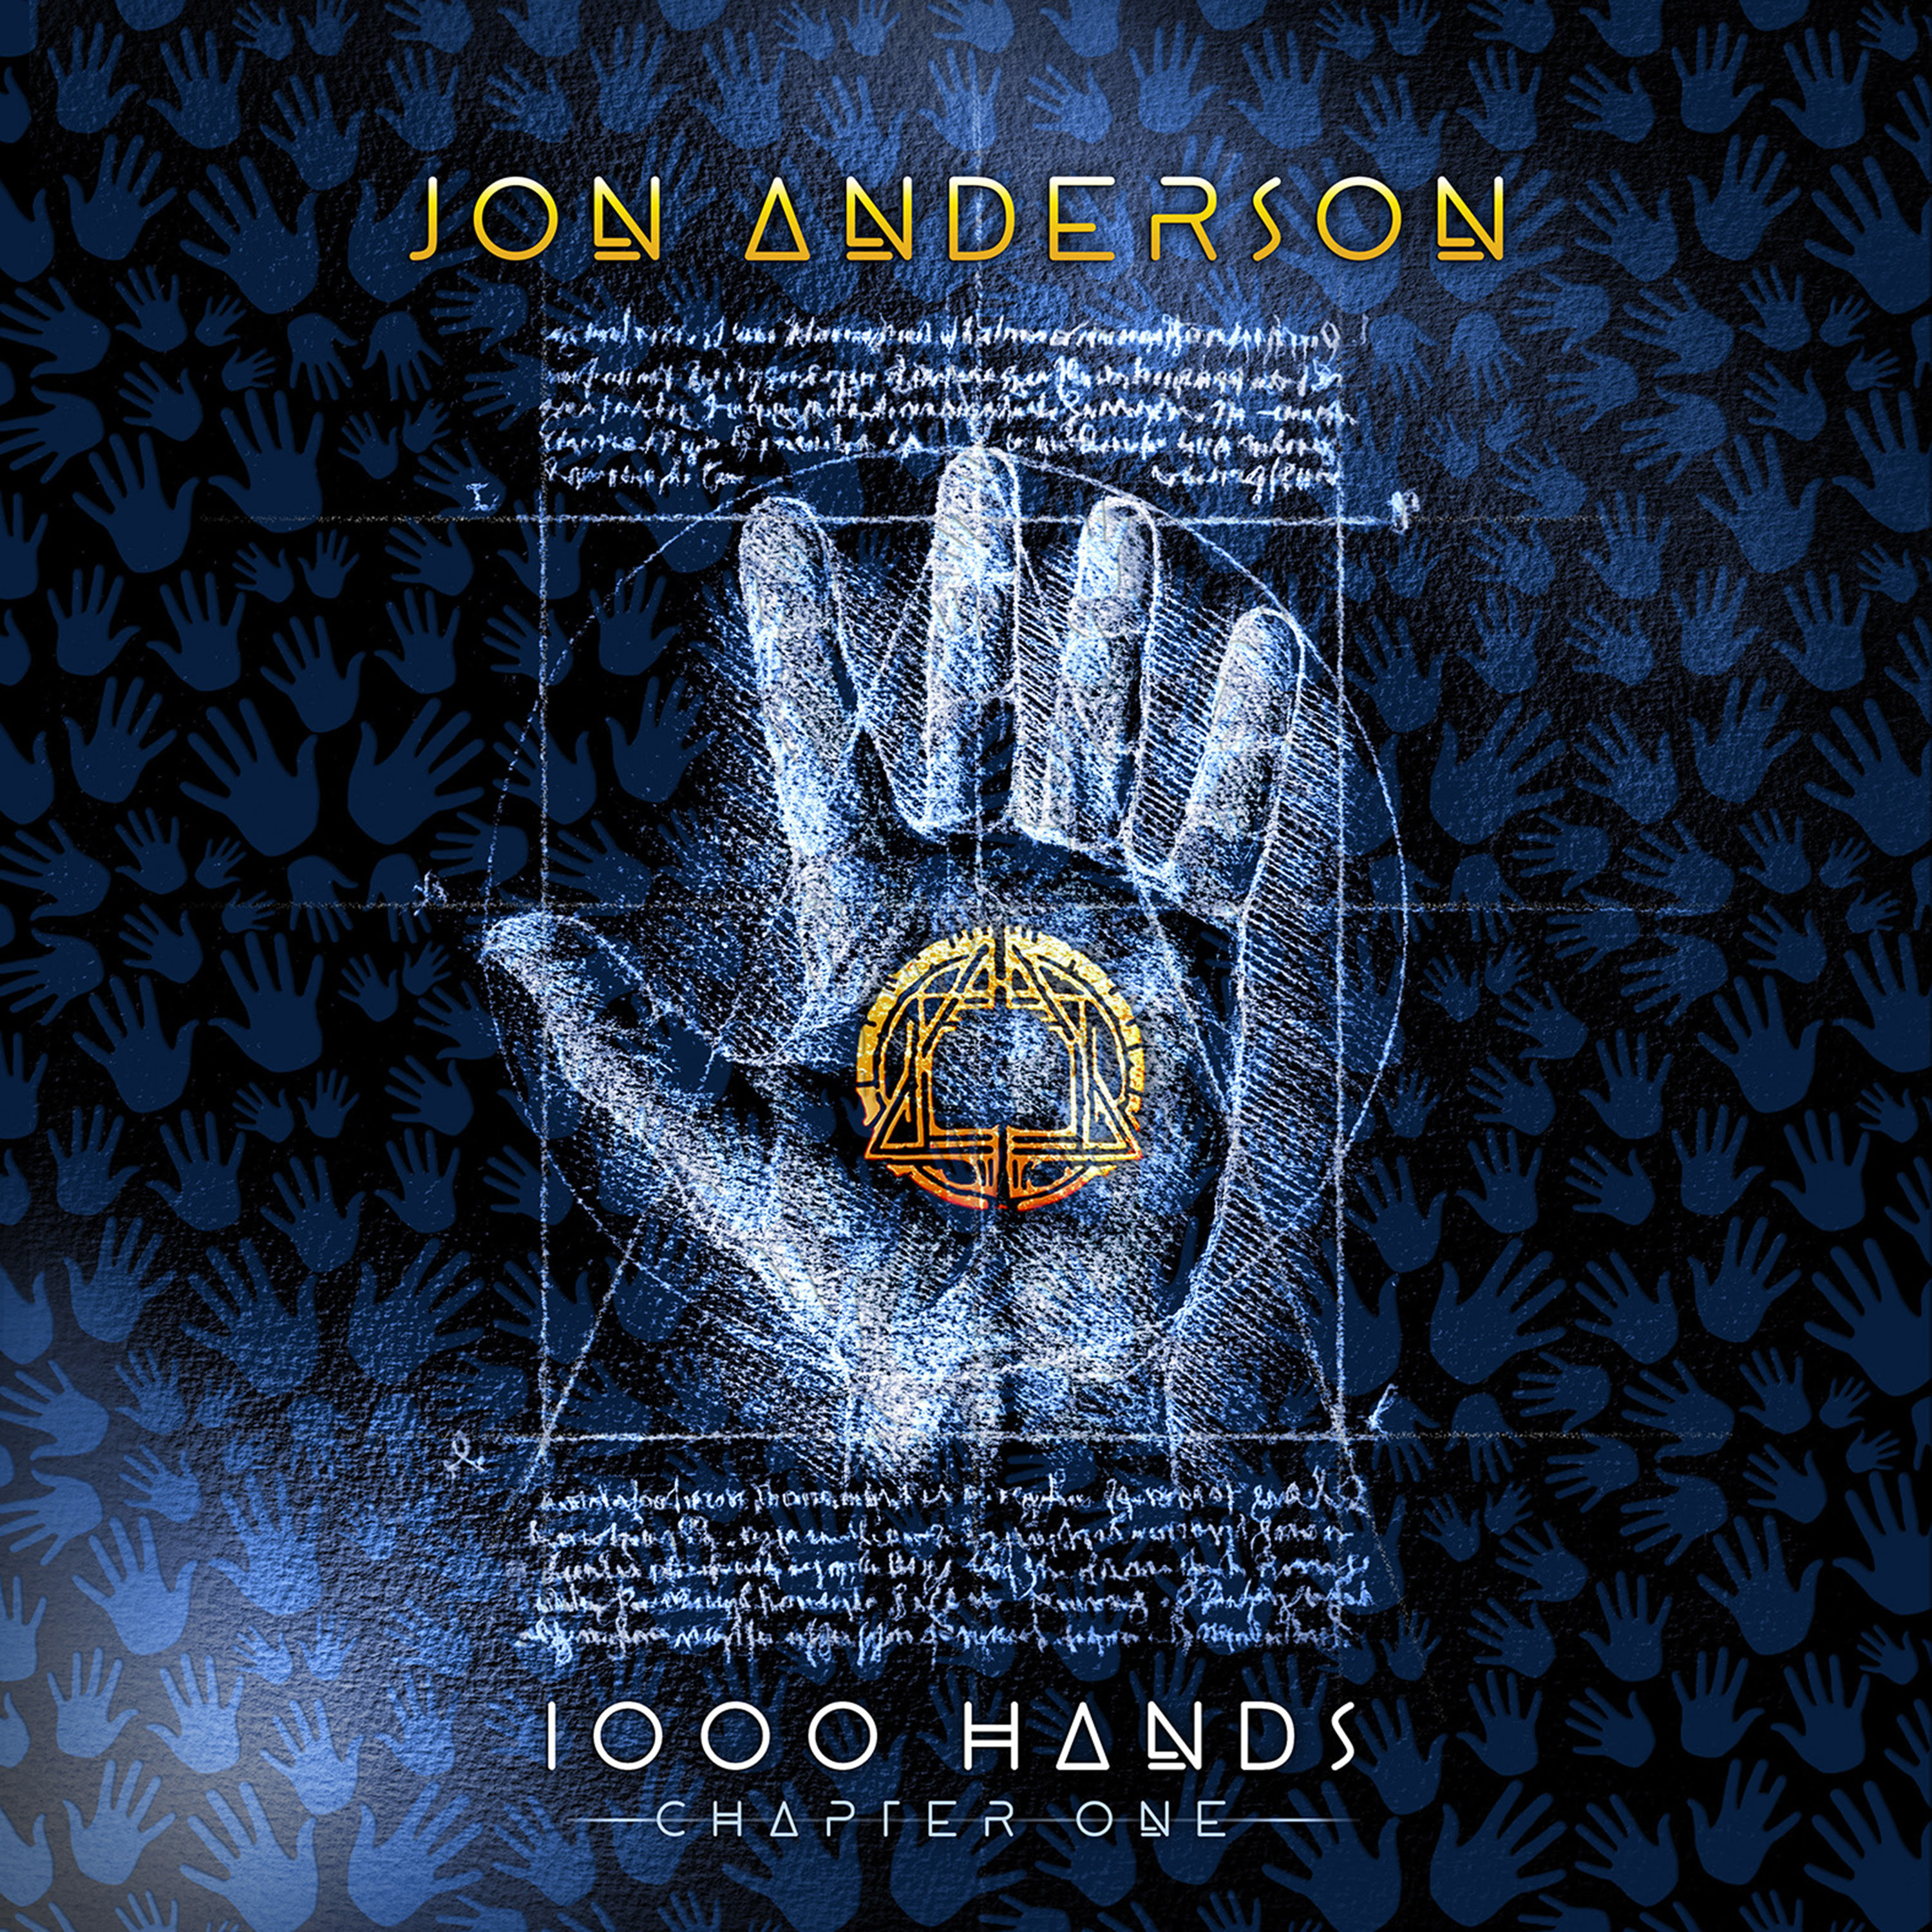 YES Founding Member JON ANDERSON Releases "1000 Hands" Tomorrow